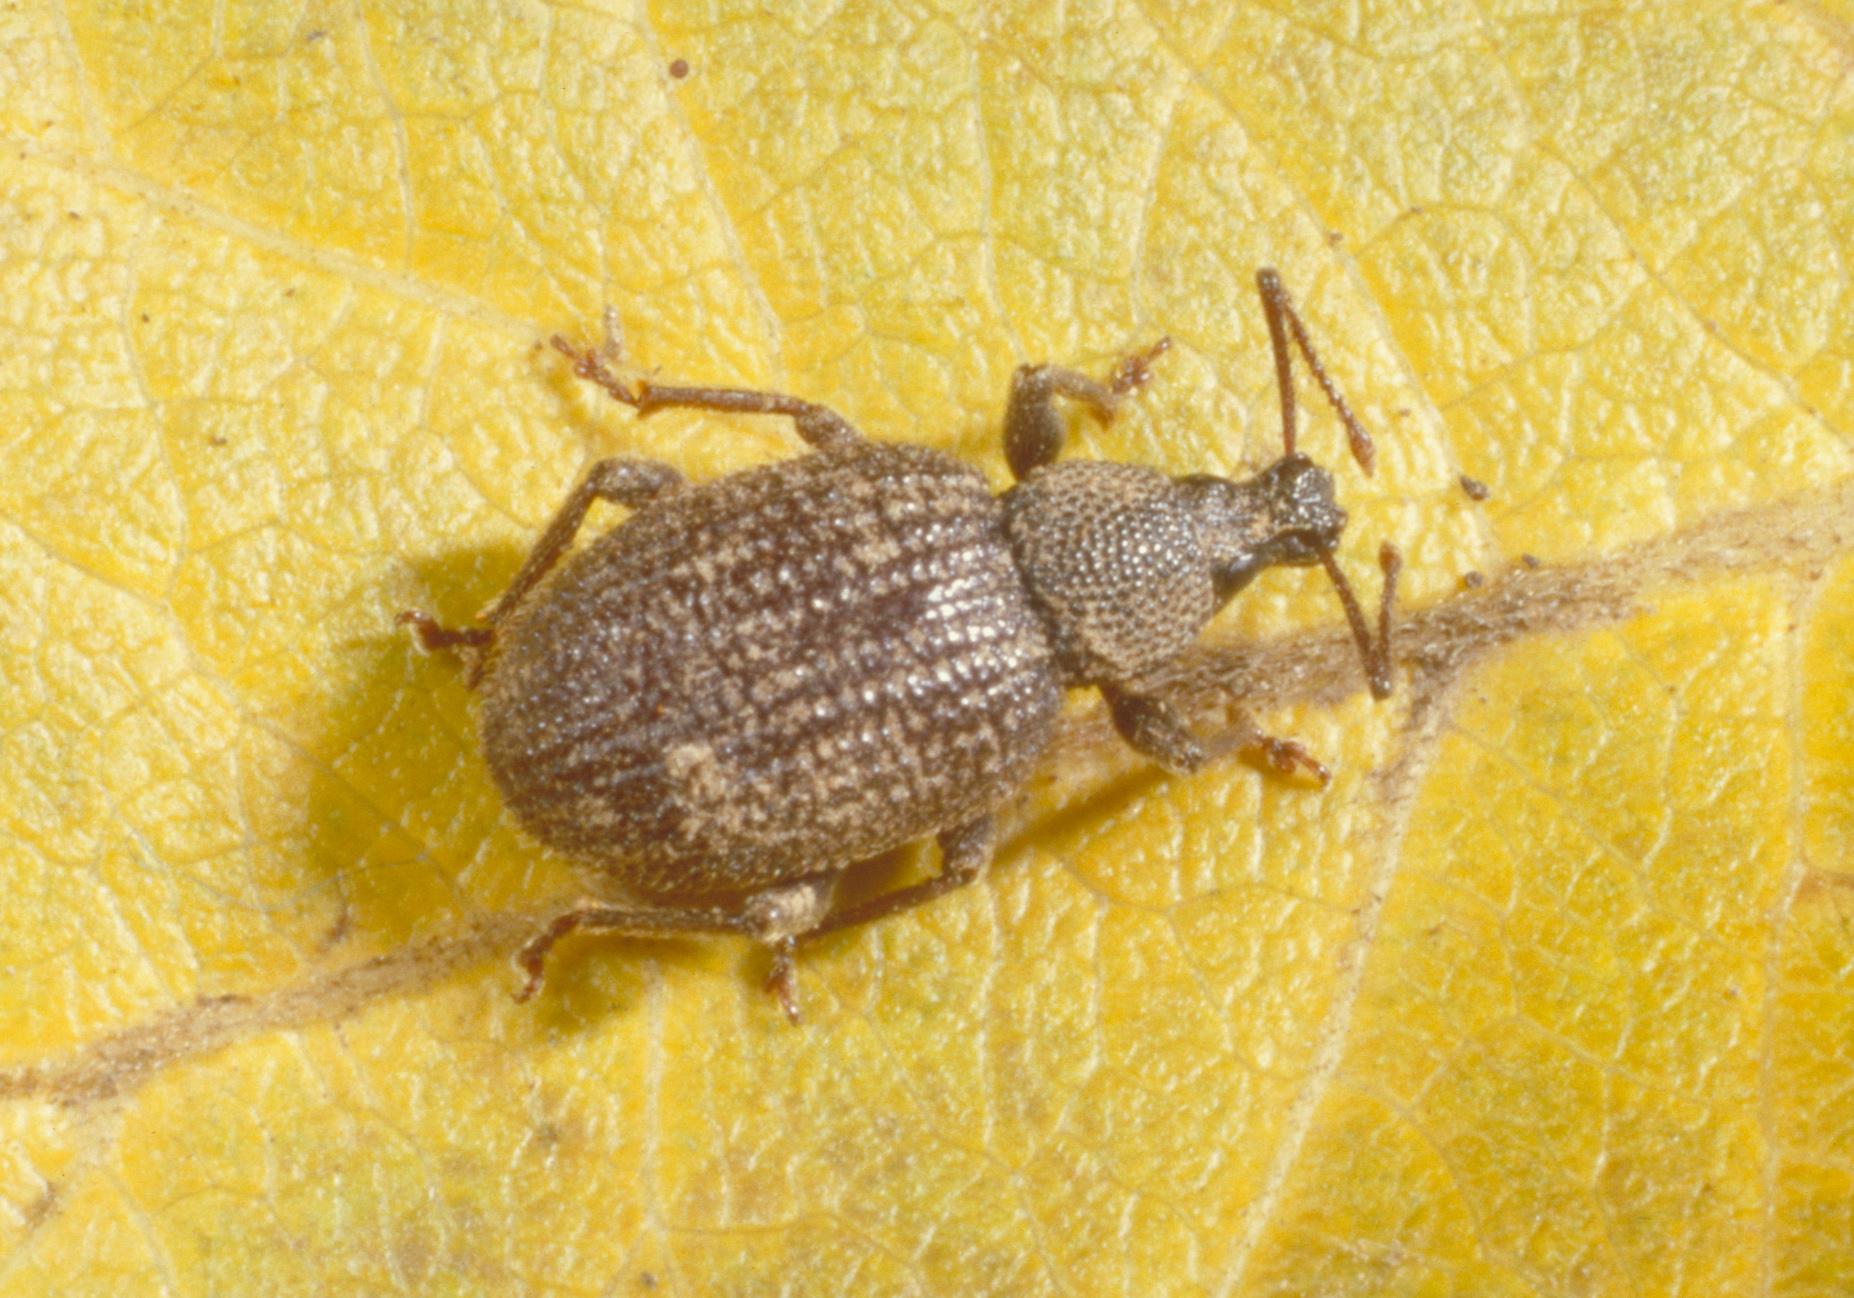 Adult root weevil (Bessing, UKY)